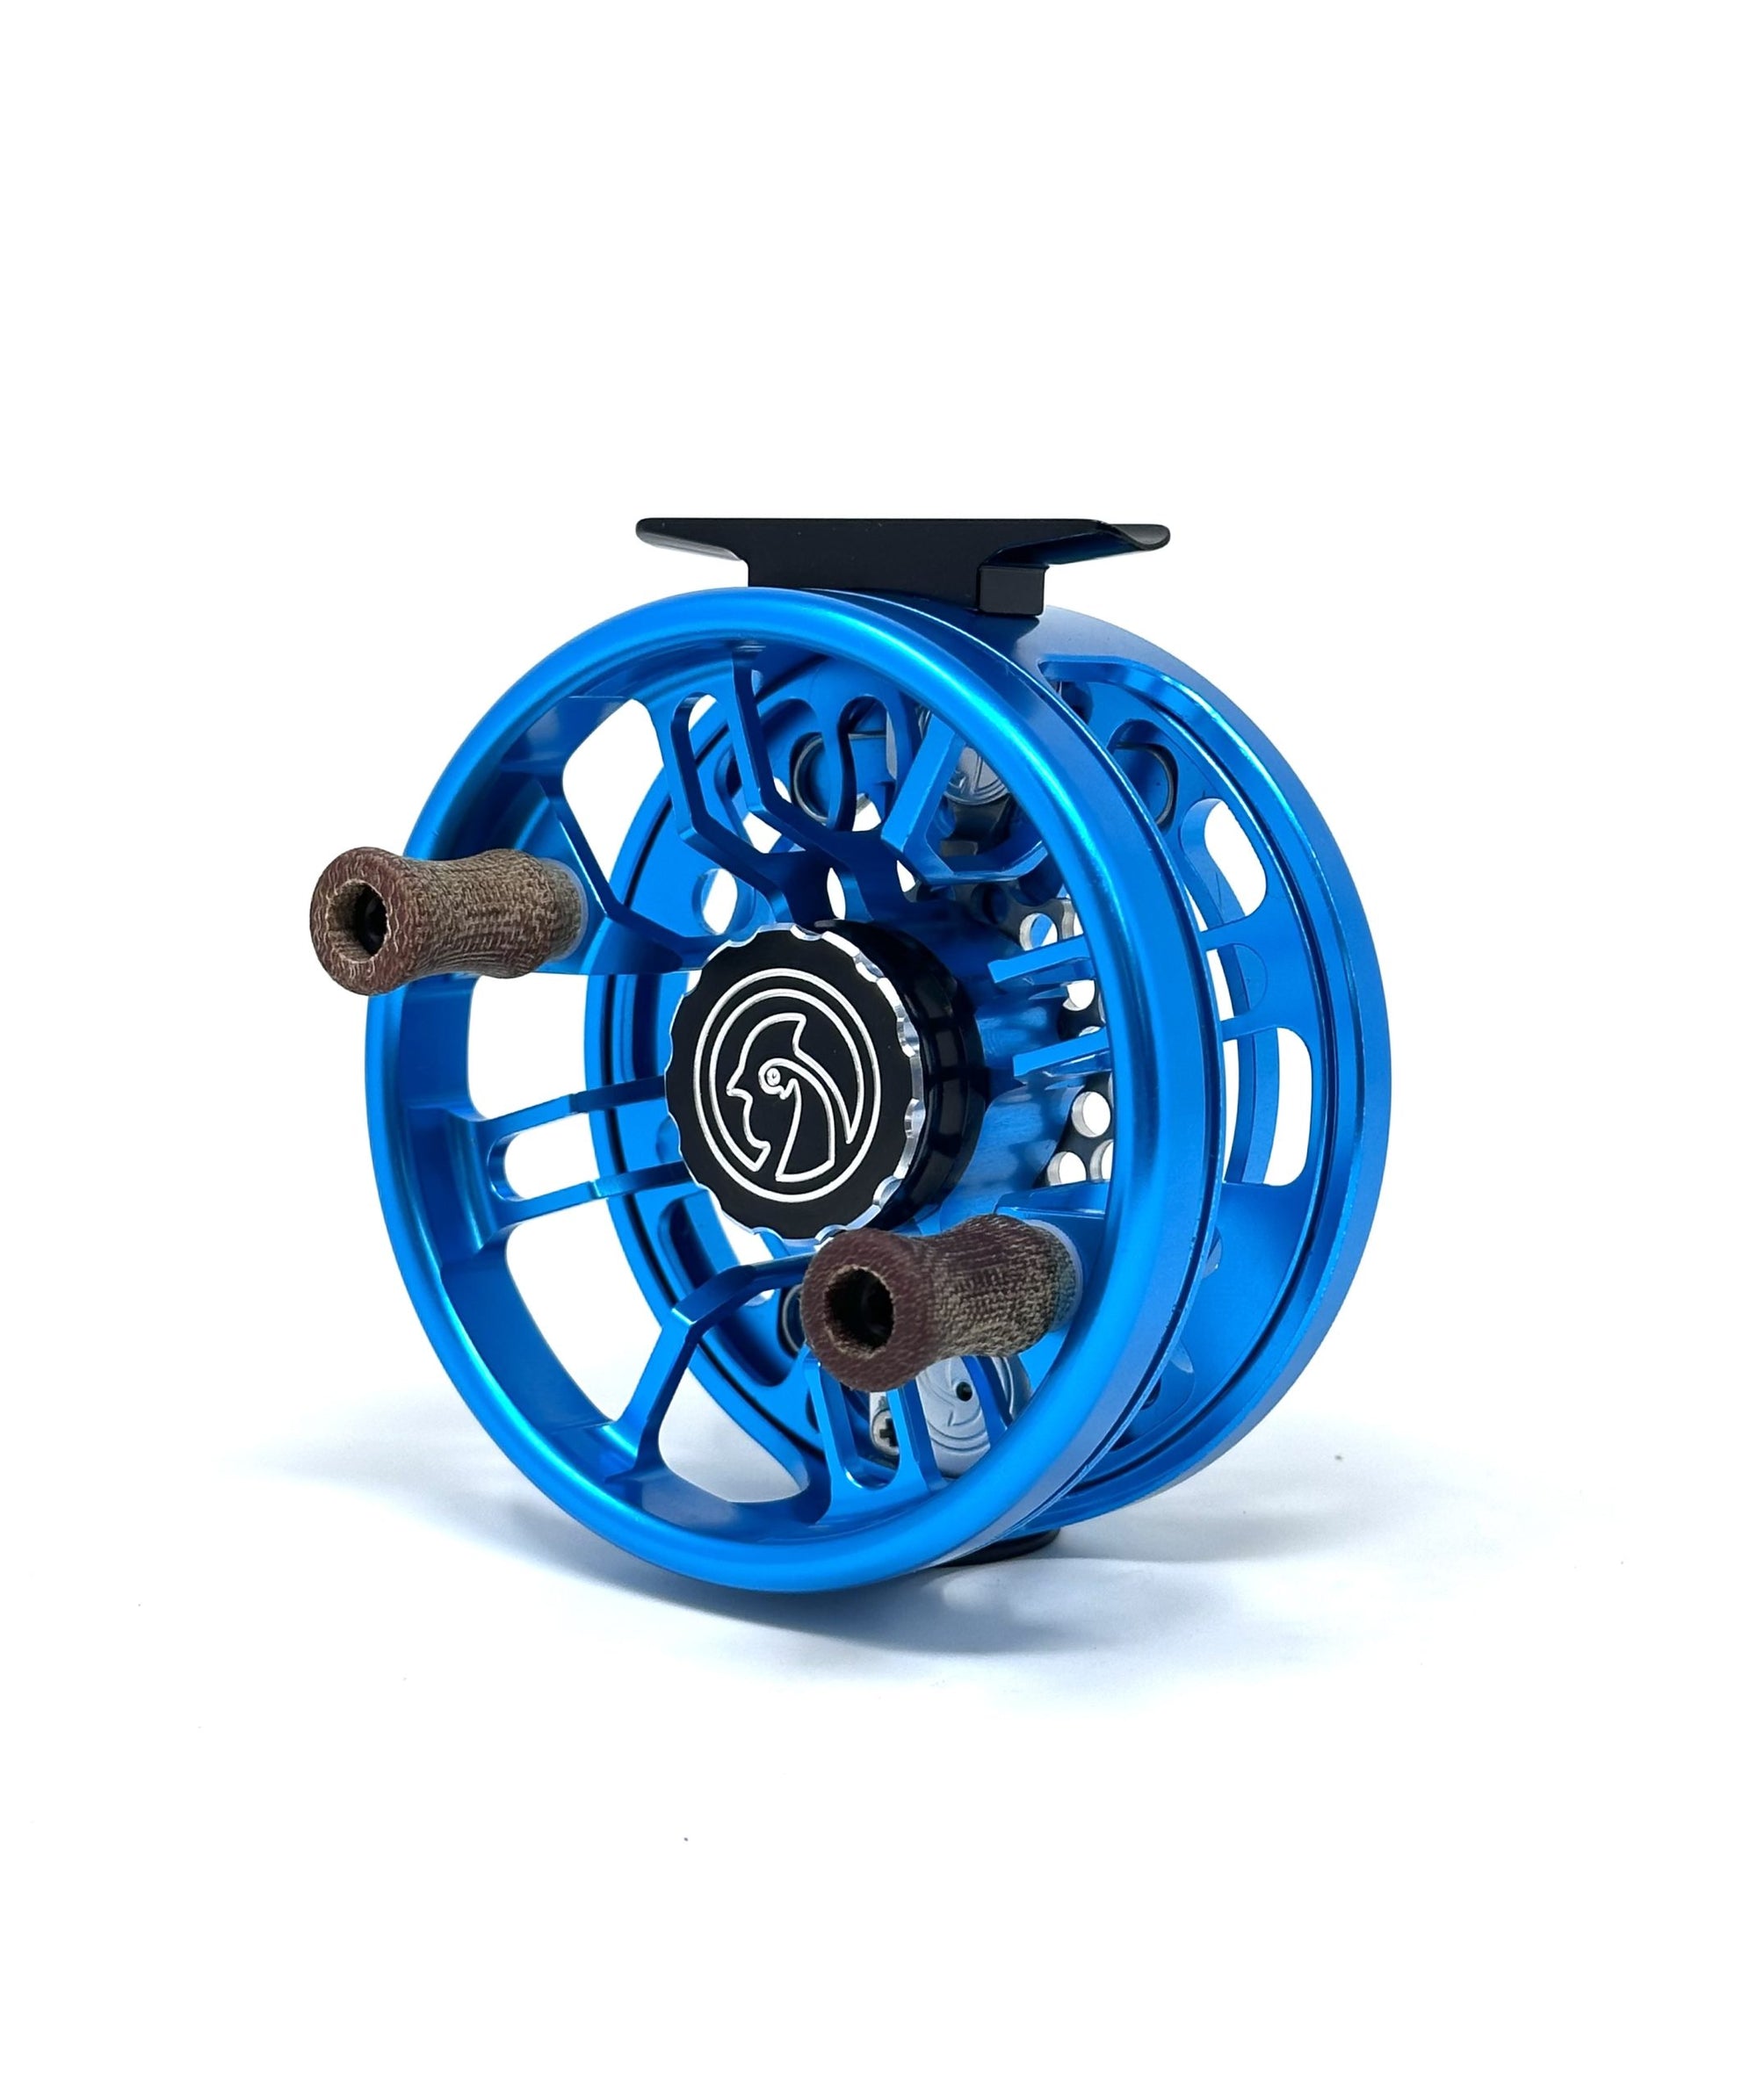 Cubalaya Fair Chase G2s 6-8wt Click Pawl Fly Reel Blue on Blue